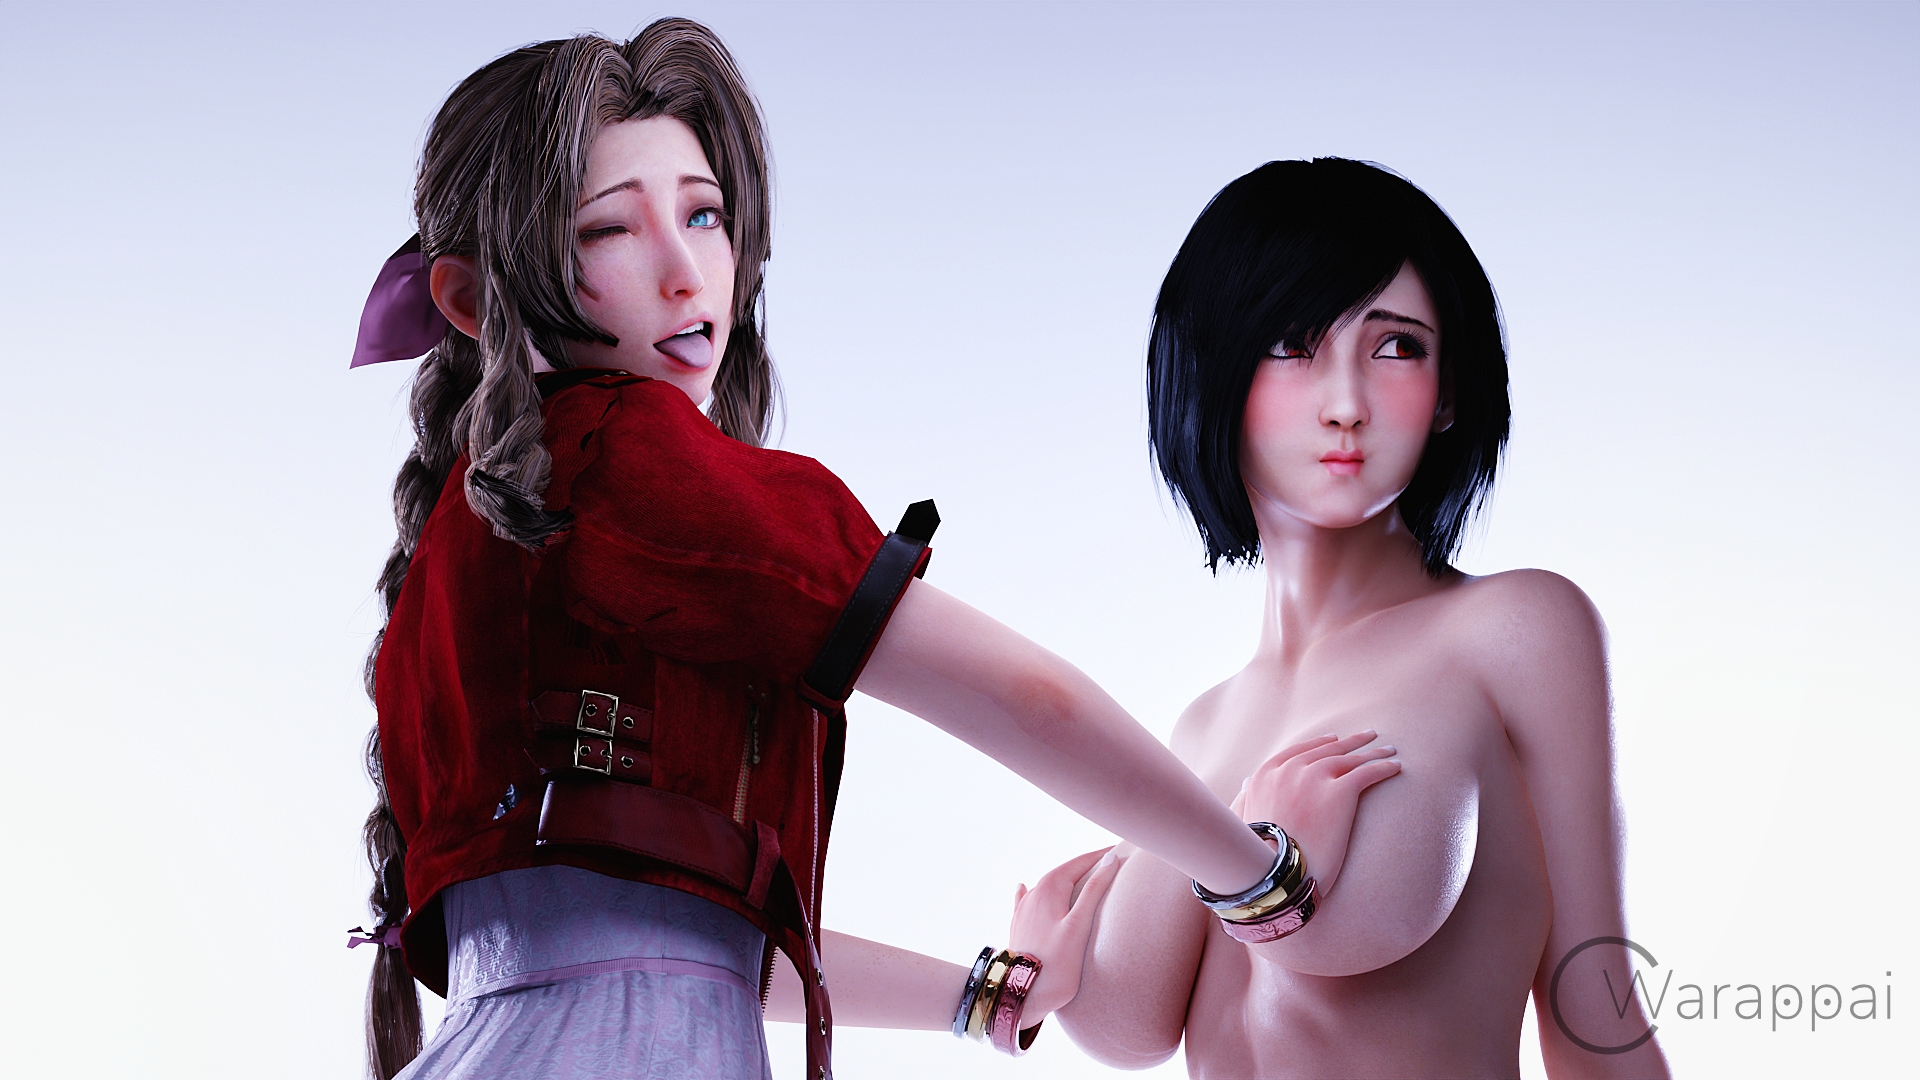 Aerith measuring Tifa s boobies the only way it should be done - by touching them and measuring both the size and softness at the same time~~